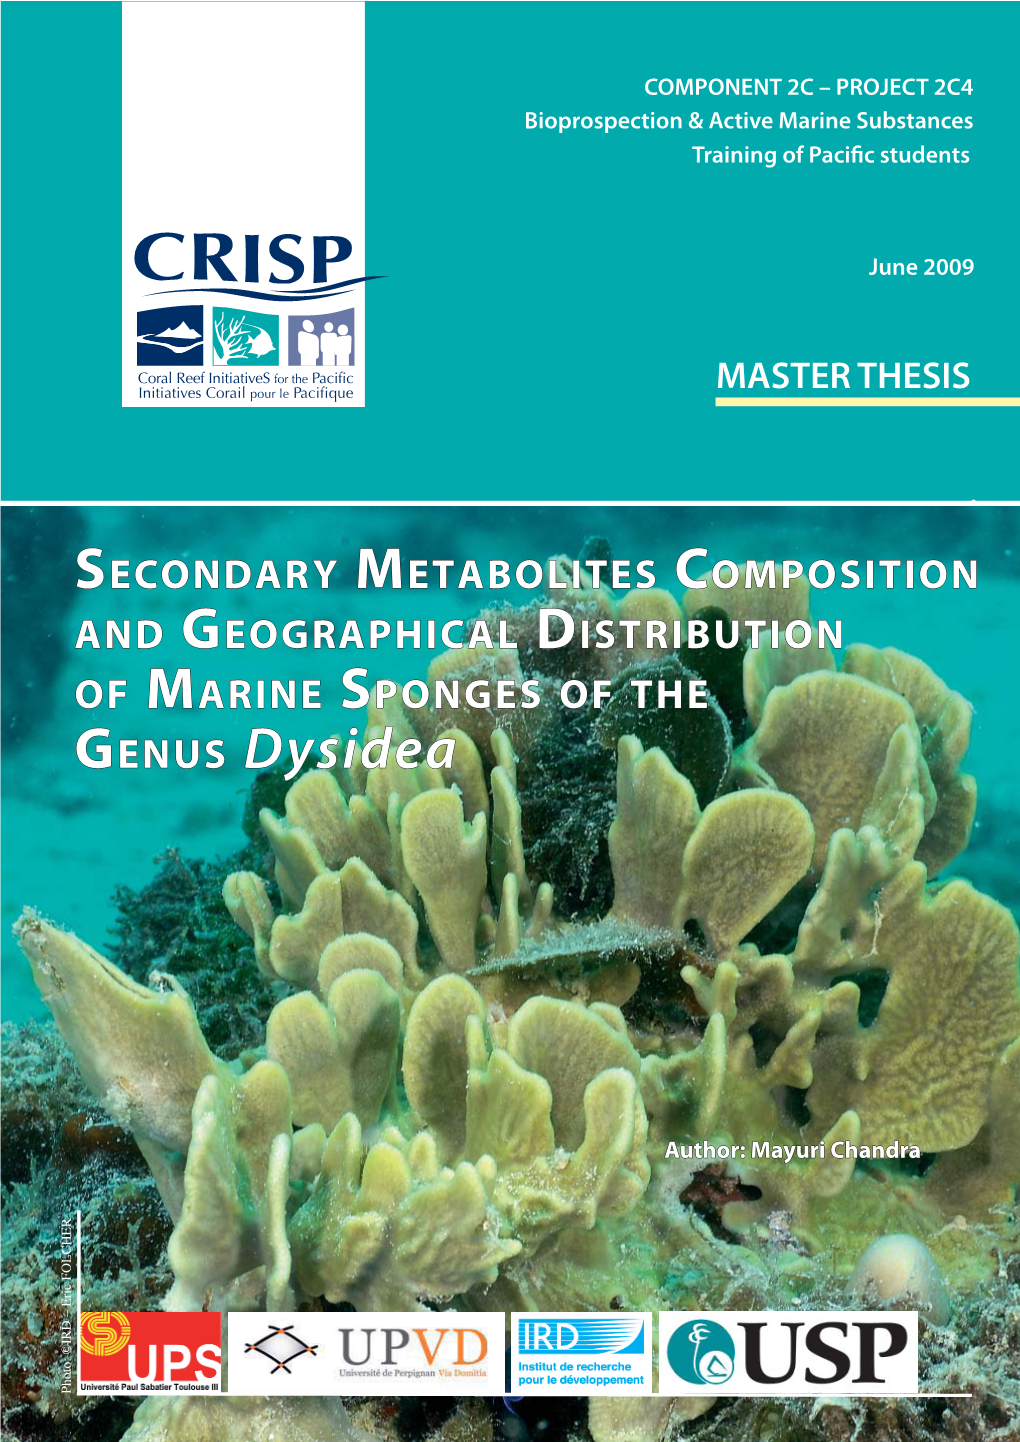 SECONDARY METABOLITES COMPOSITION and GEOGRAPHICAL DISTRIBUTION of MARINE SPONGES of the GENUS Dysidea